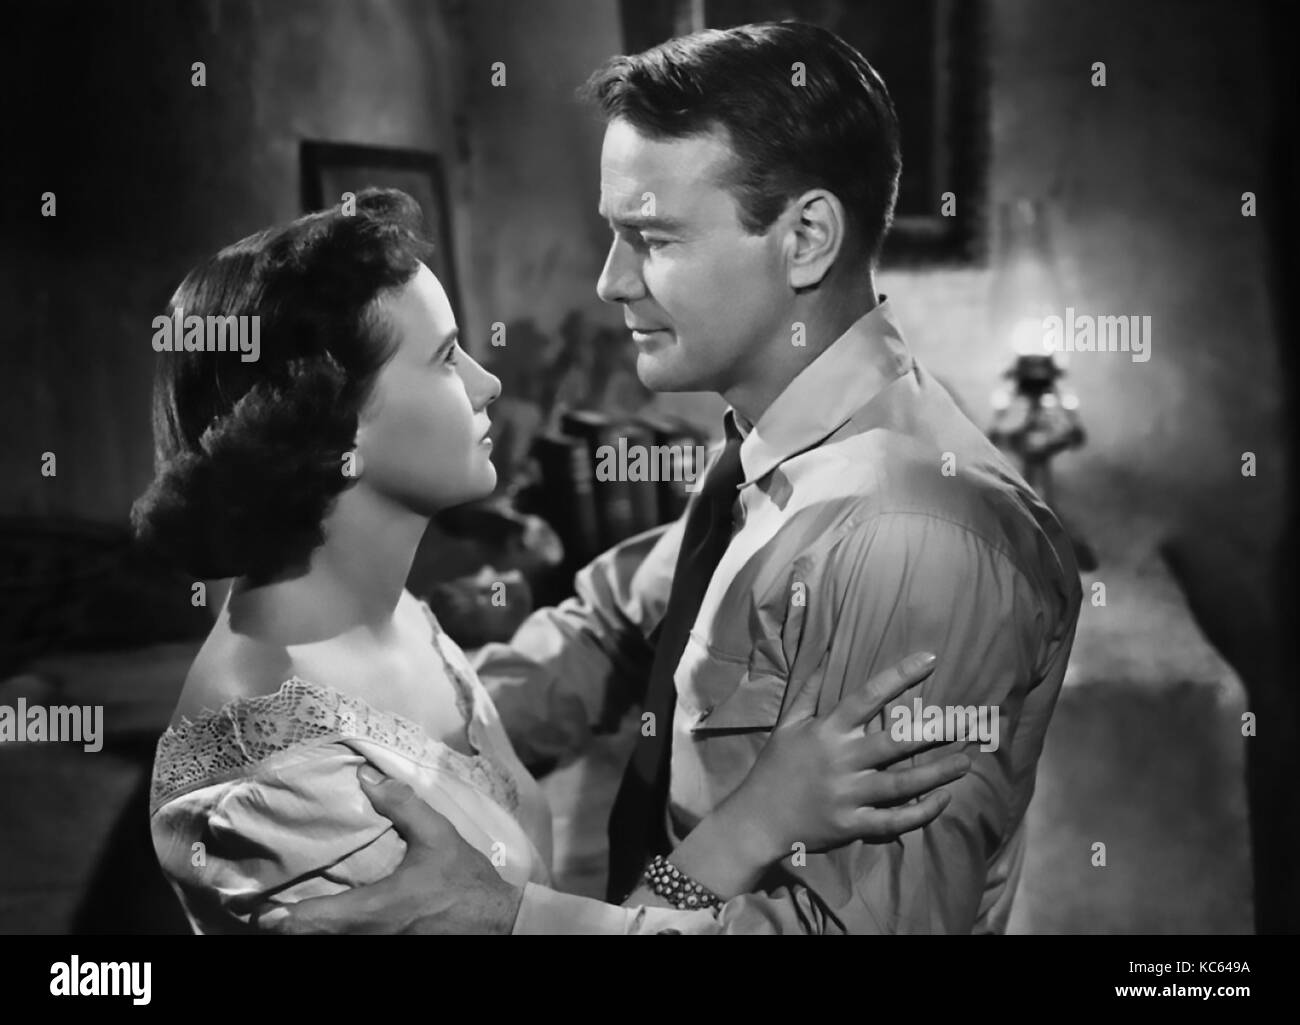 THE CAPTURE 1950 Repiublic Pictures film with Teresa Wright and Lew Ayres Stock Photo